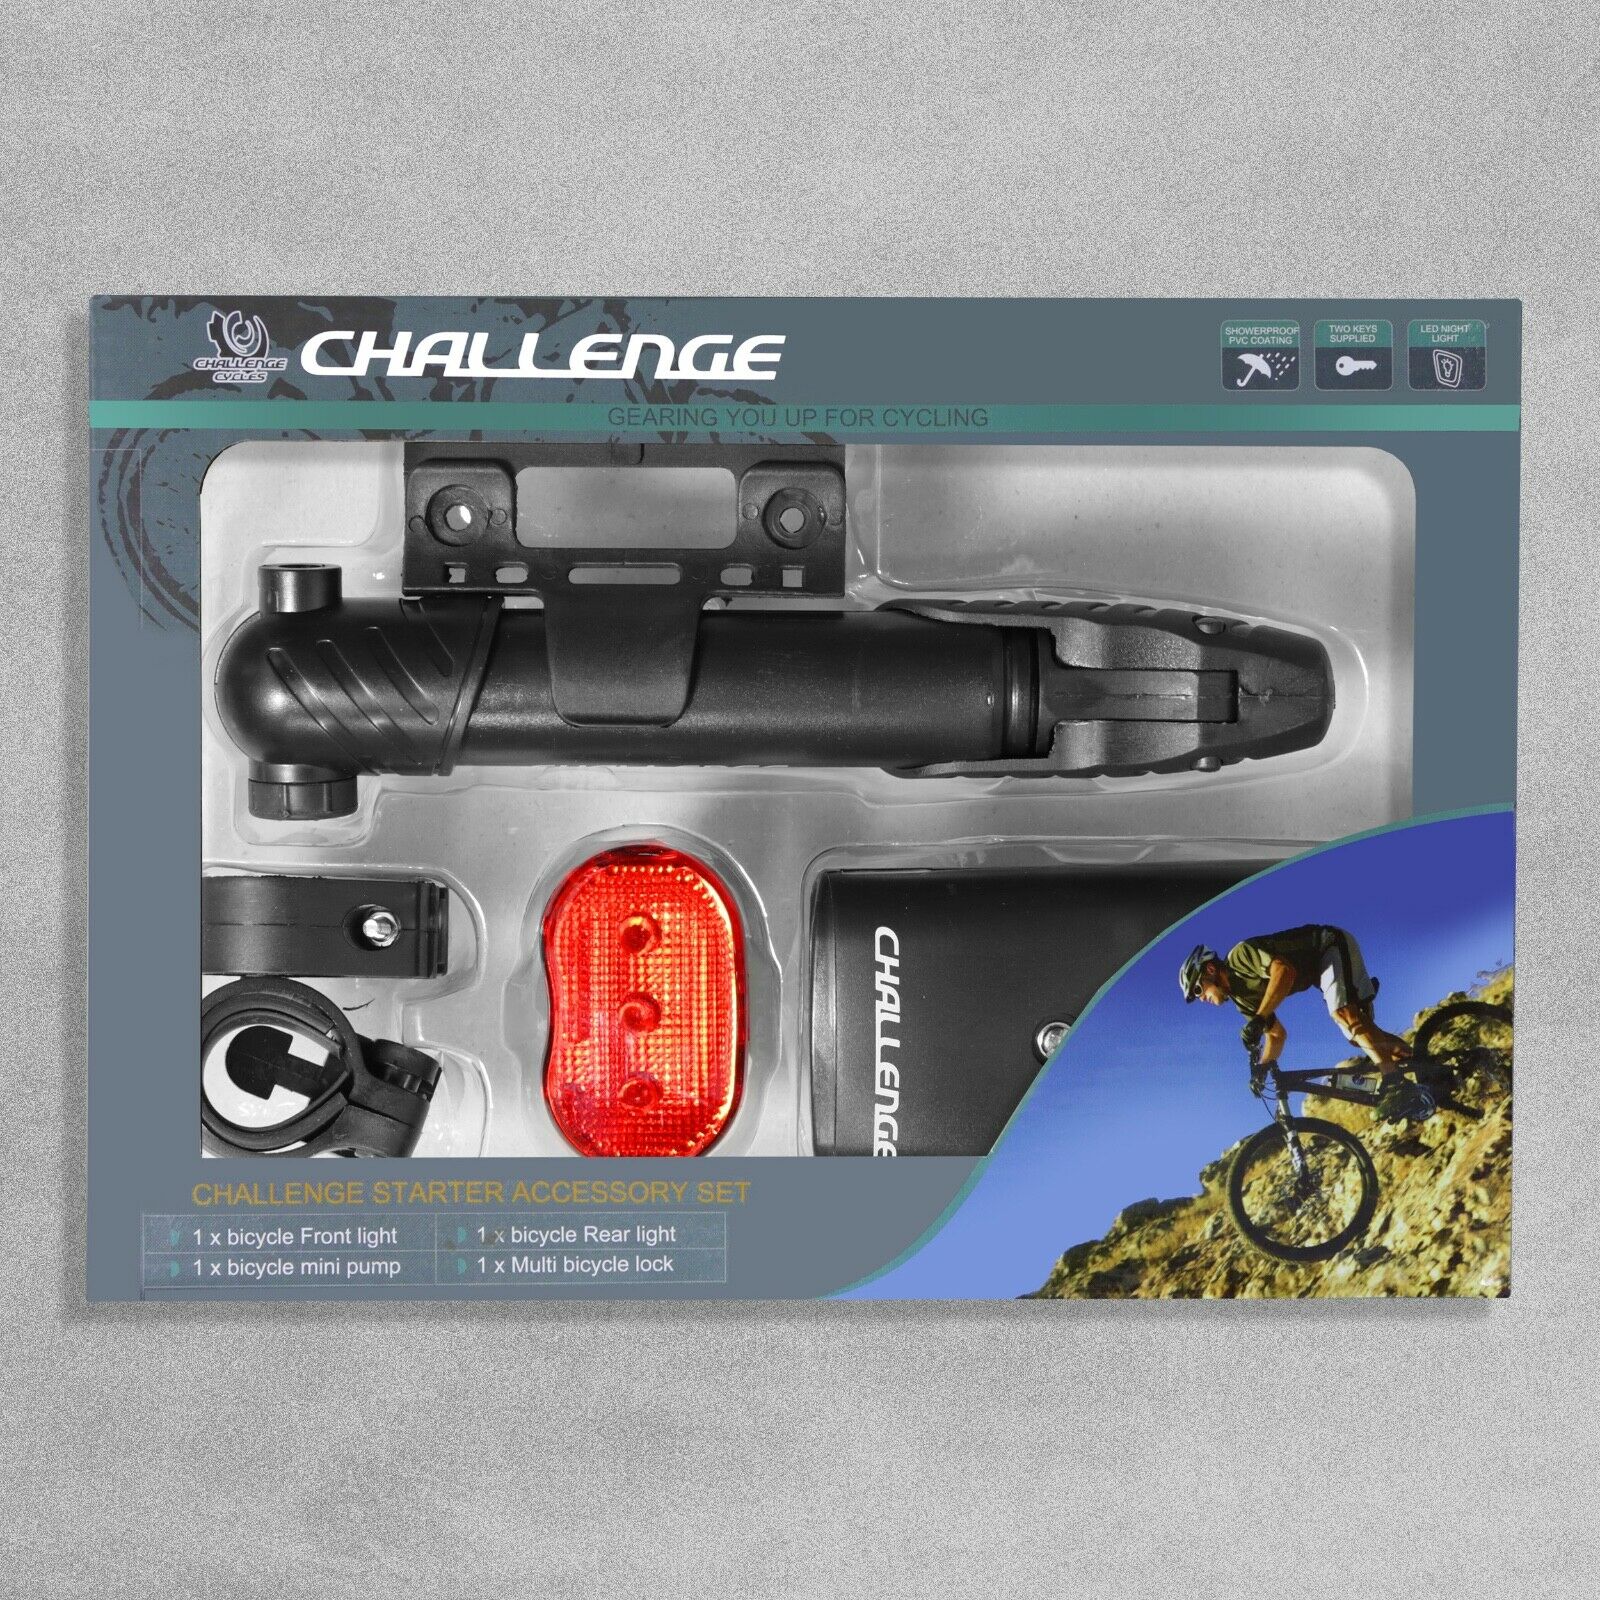 4 Piece Challenge Cycle Accessory Kit